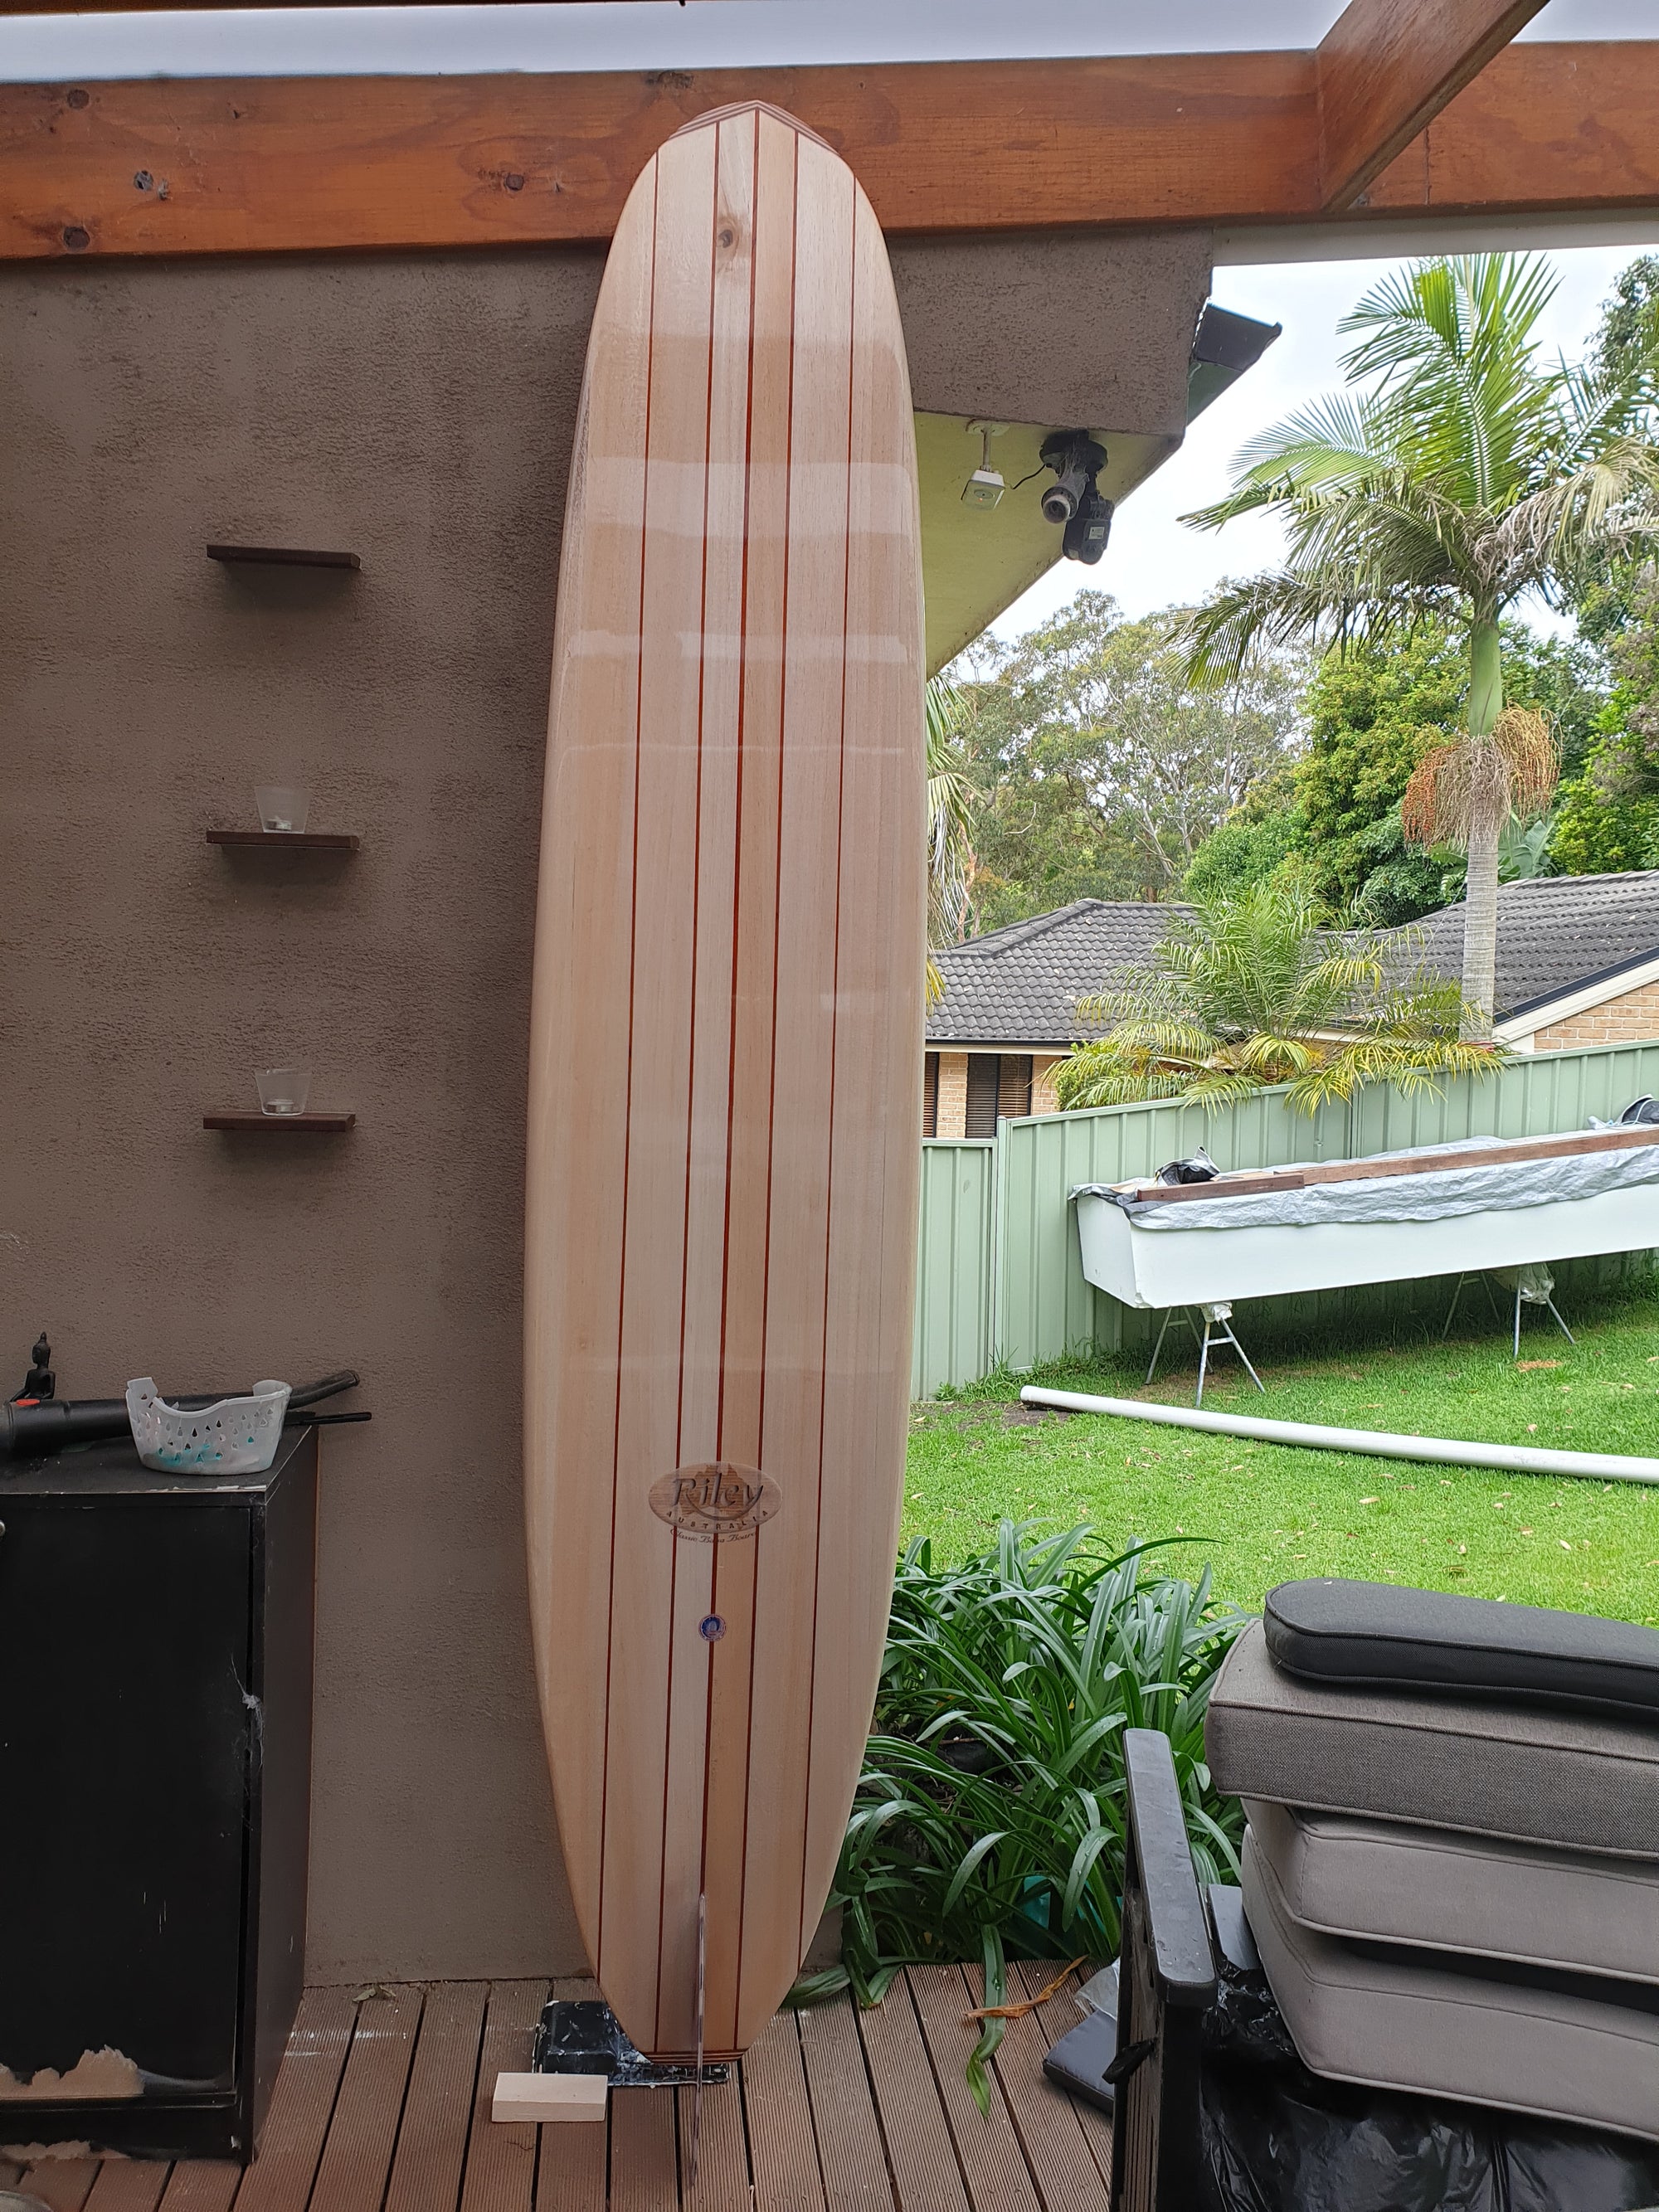 Raw balsa wood LOGS or trees or branches - Riley Balsa Wood Surfboards